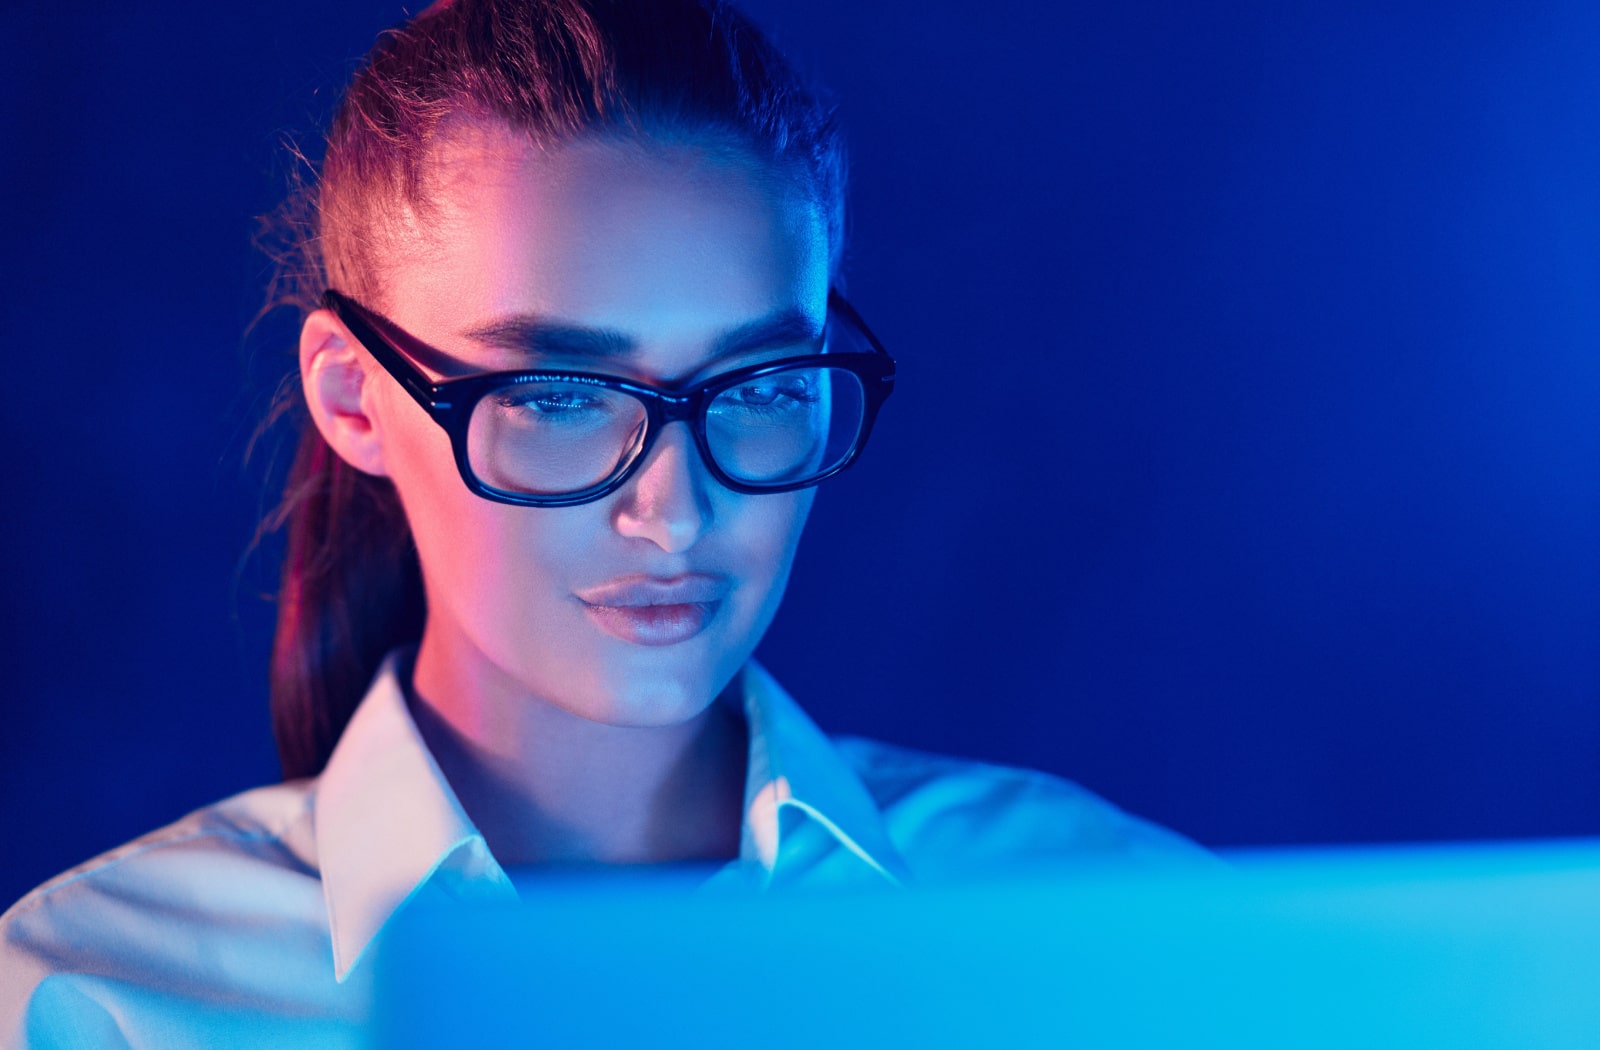 A young woman wearing blue light protection glasses while working on her laptop at night.